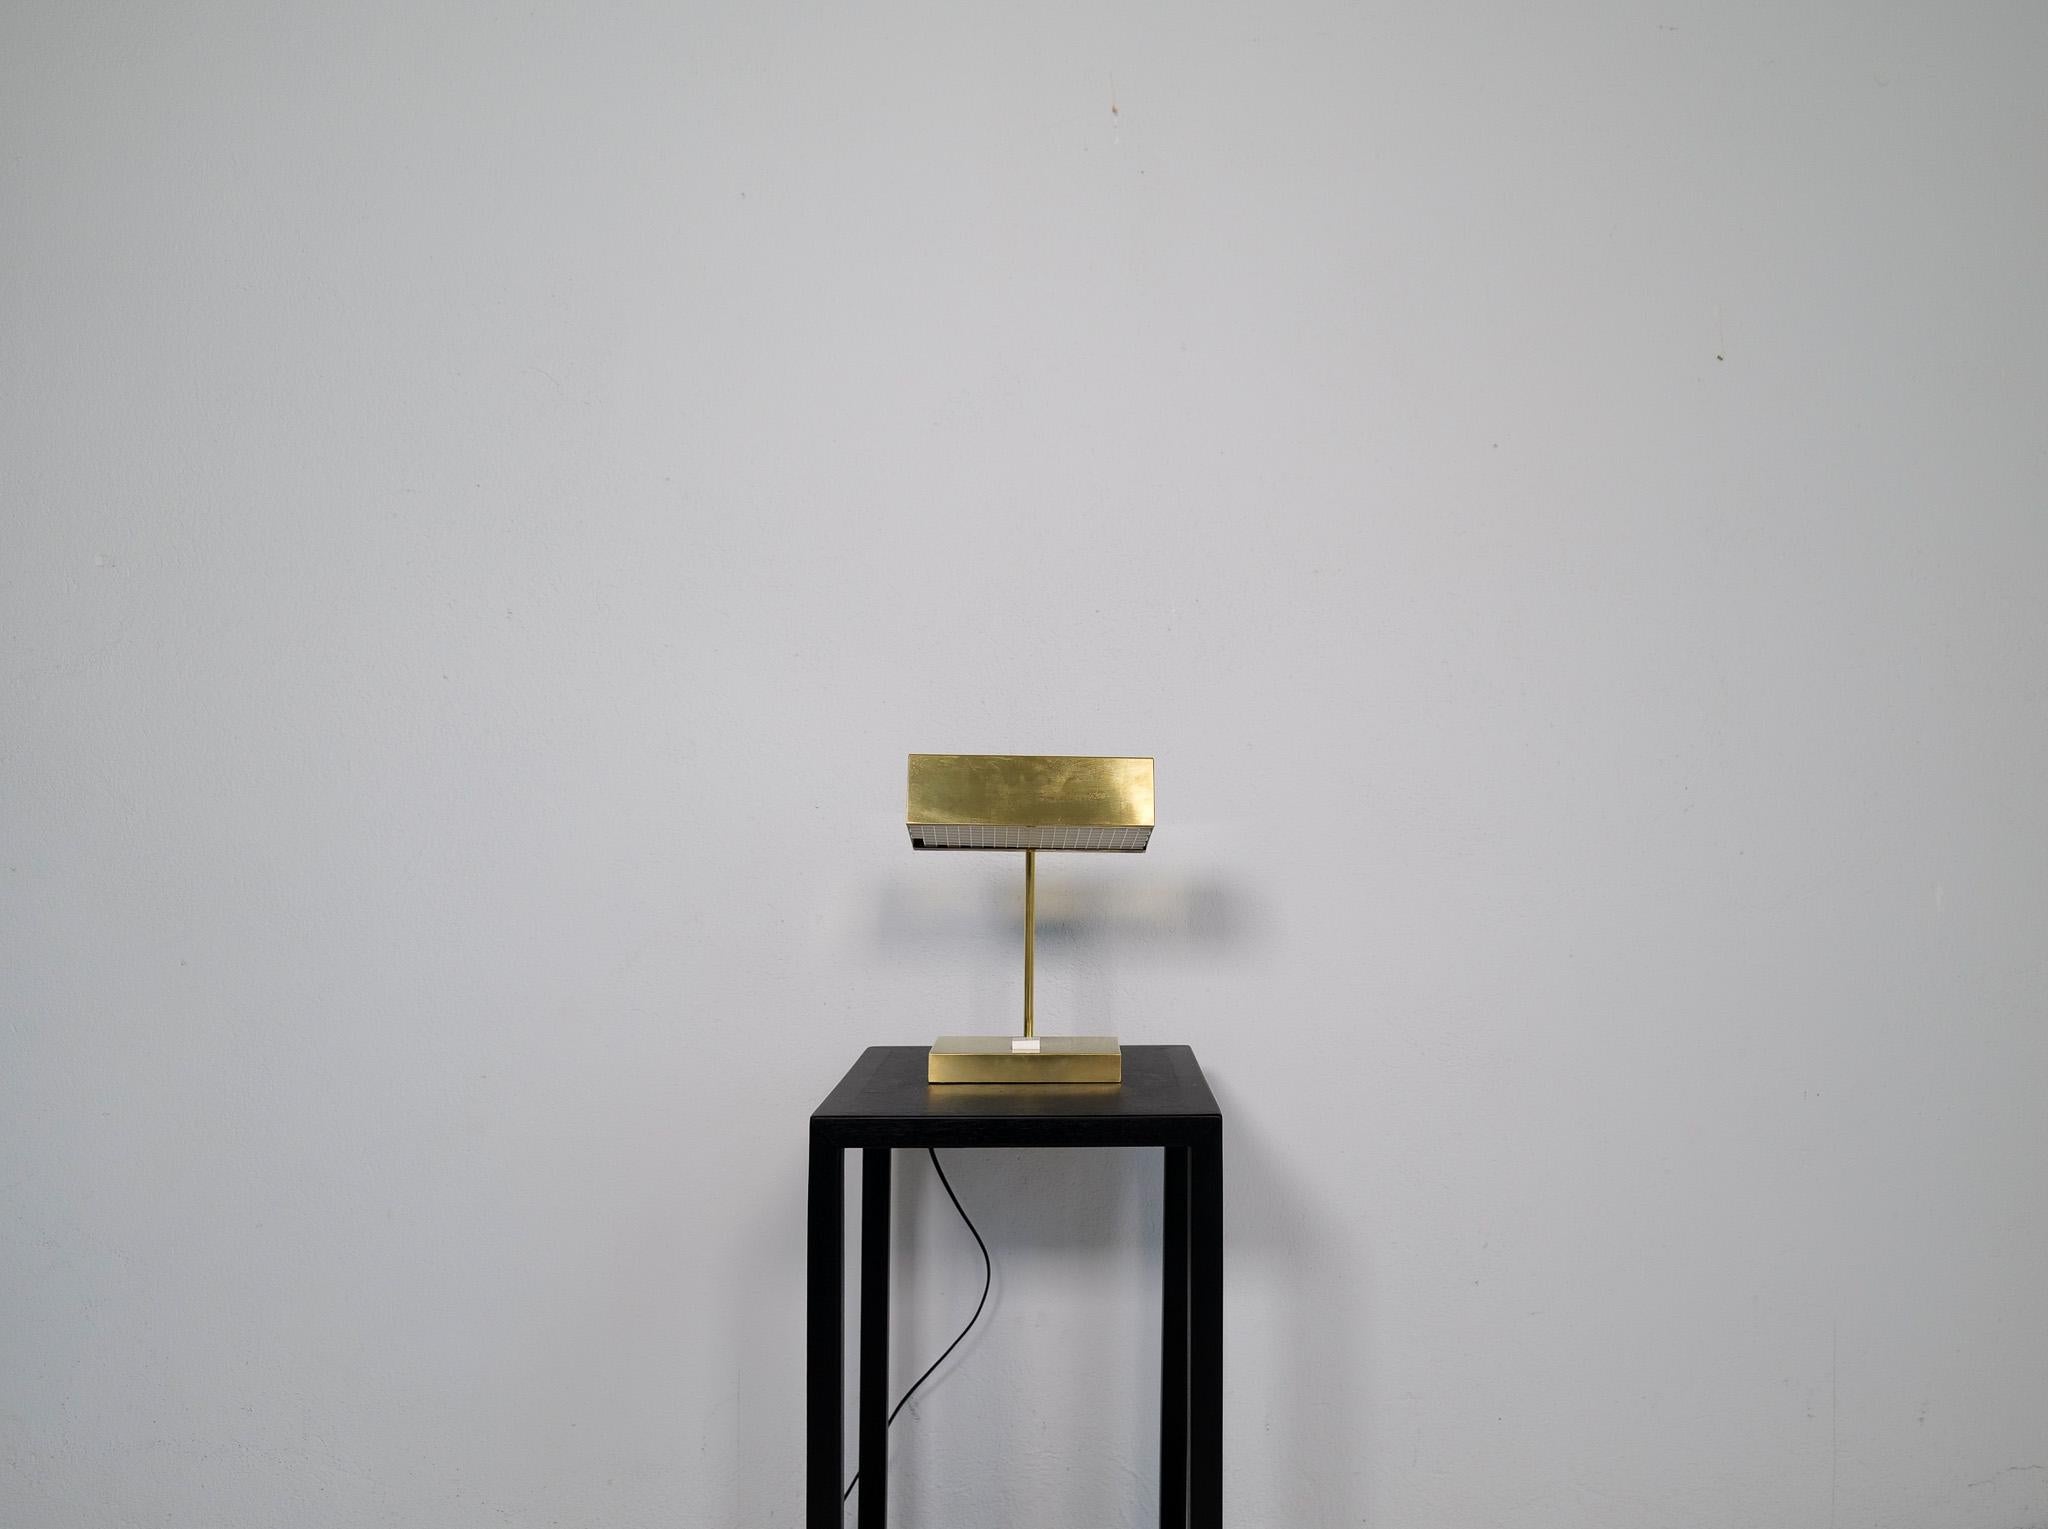 This adjustable minimalistic table lamp / desk light in brass, was design by Björn Svensson. Produced in Sweden by “Elidus” in the 1970. 

Hans-Agne Jakobsson was one of the designers at the company 